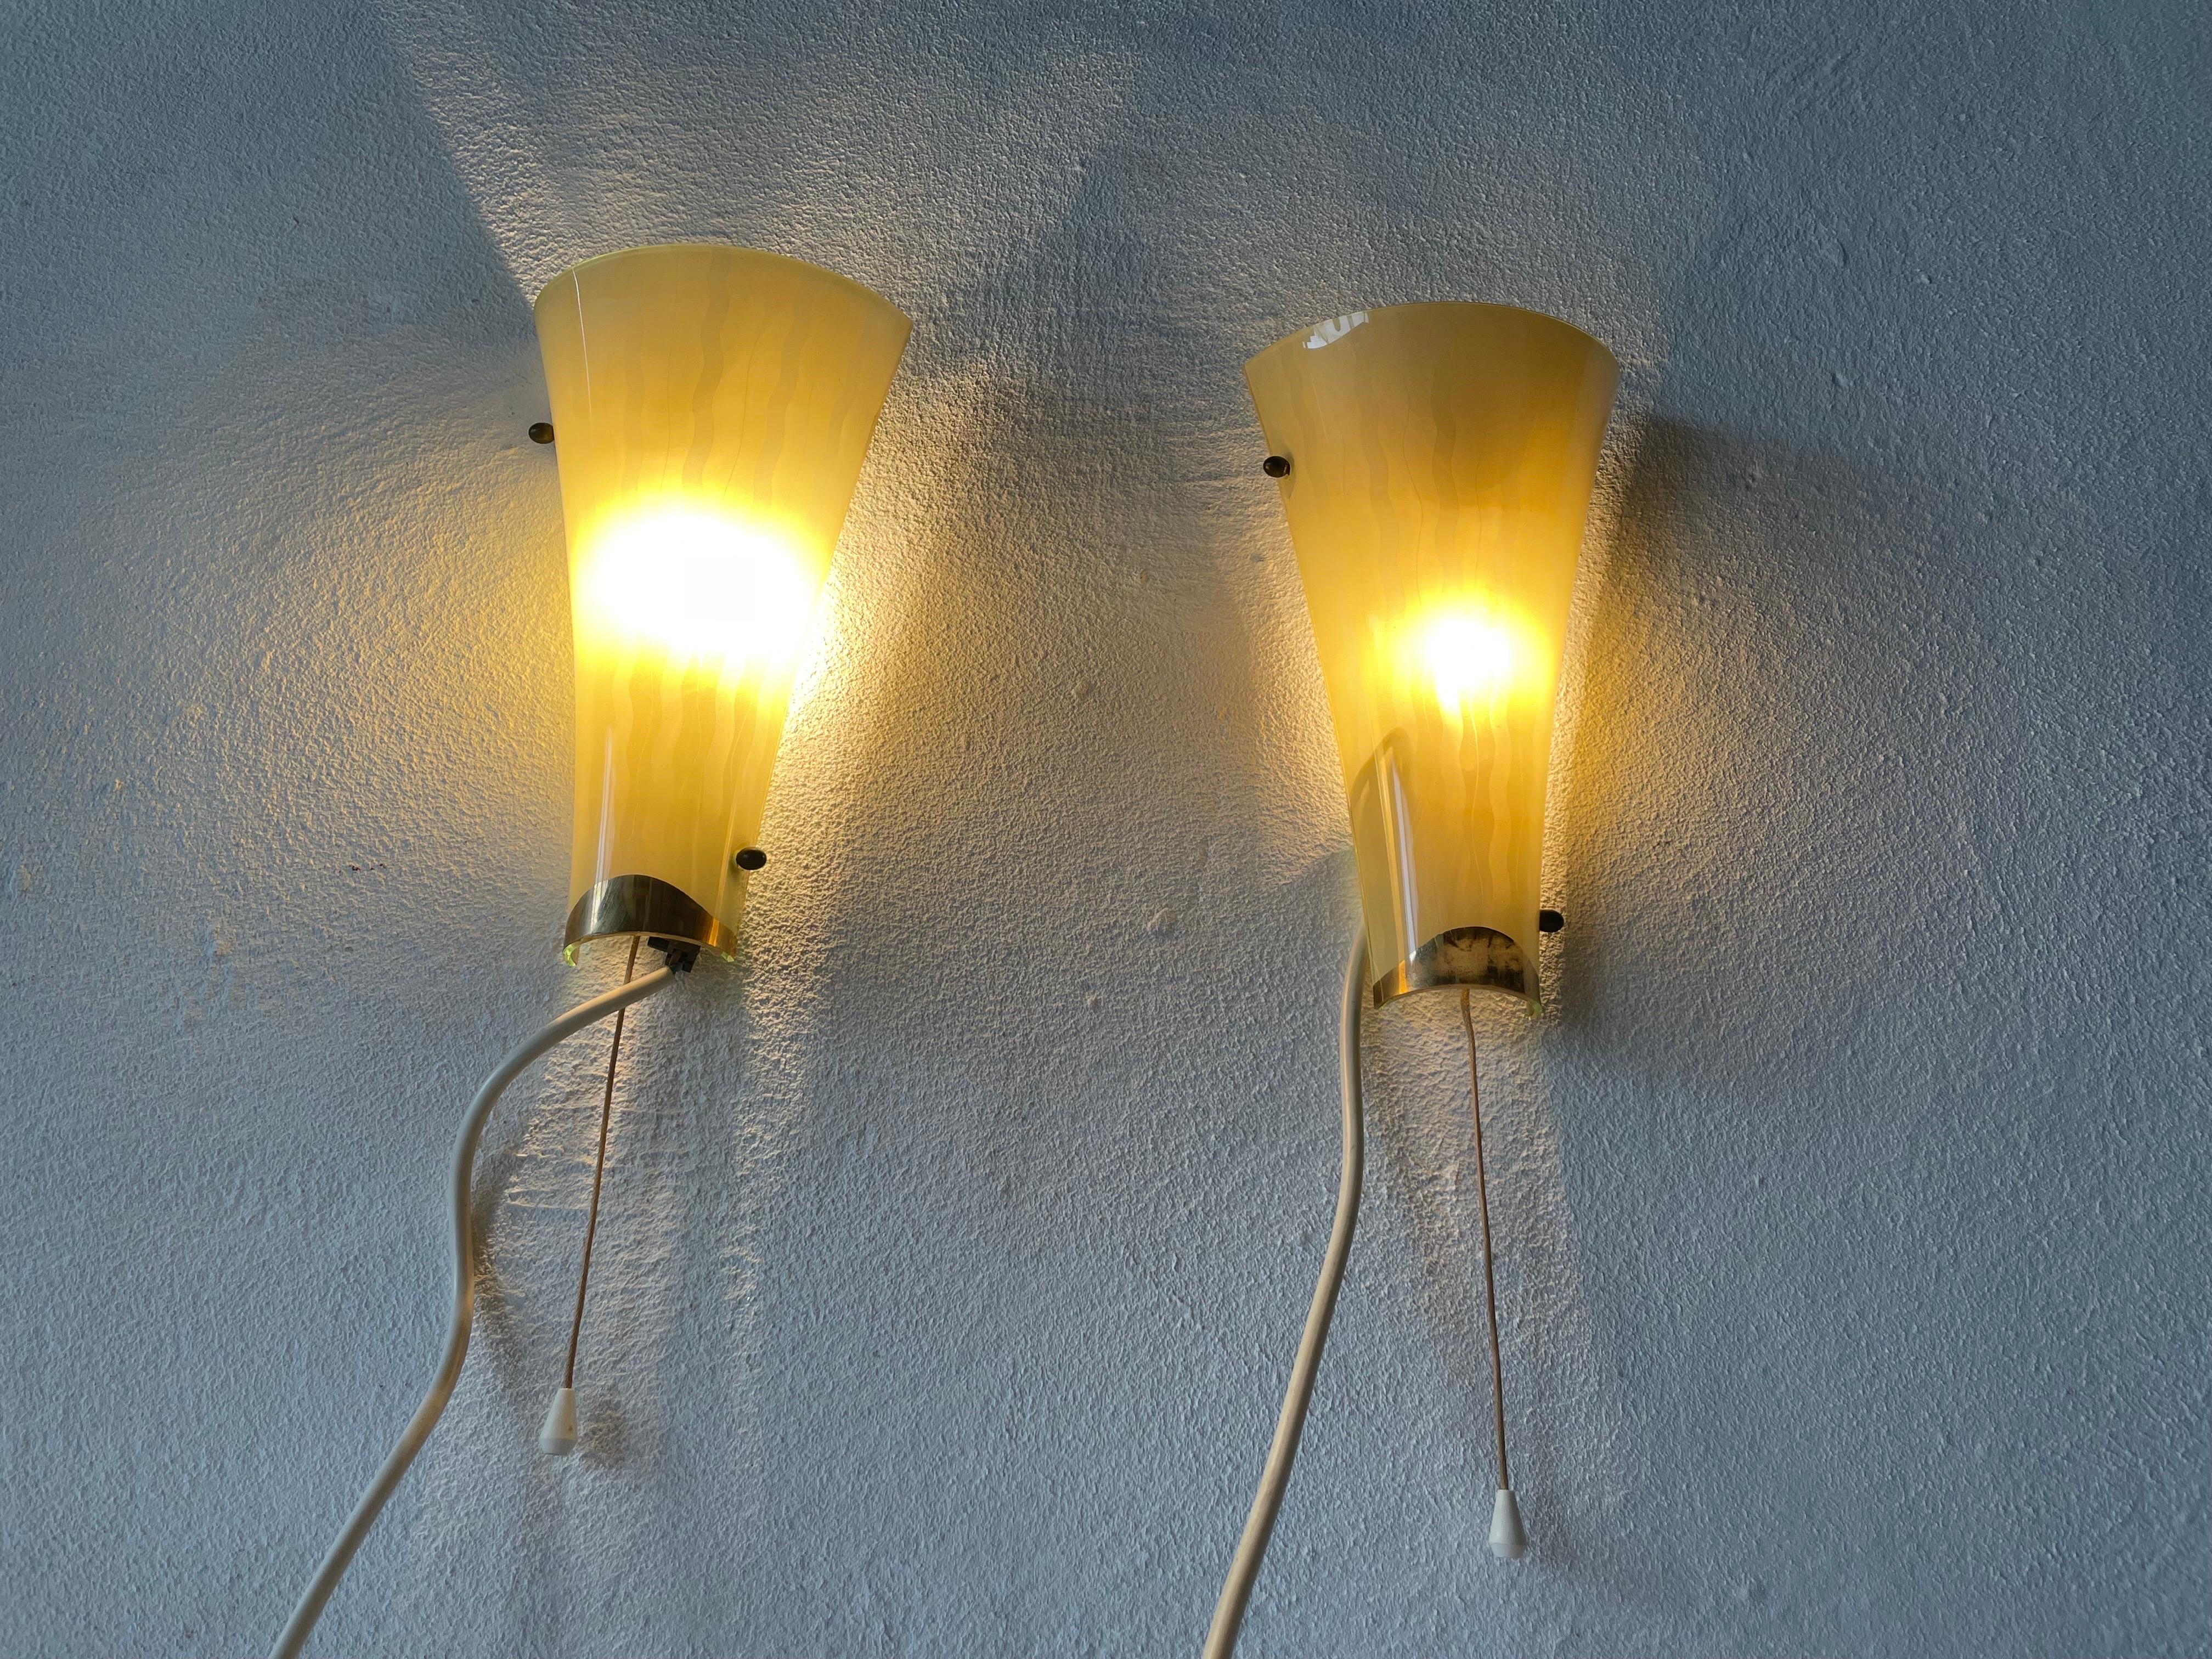 Mid-century Green Curved Glass Pair of Sconces, 1950s, Germany For Sale 2